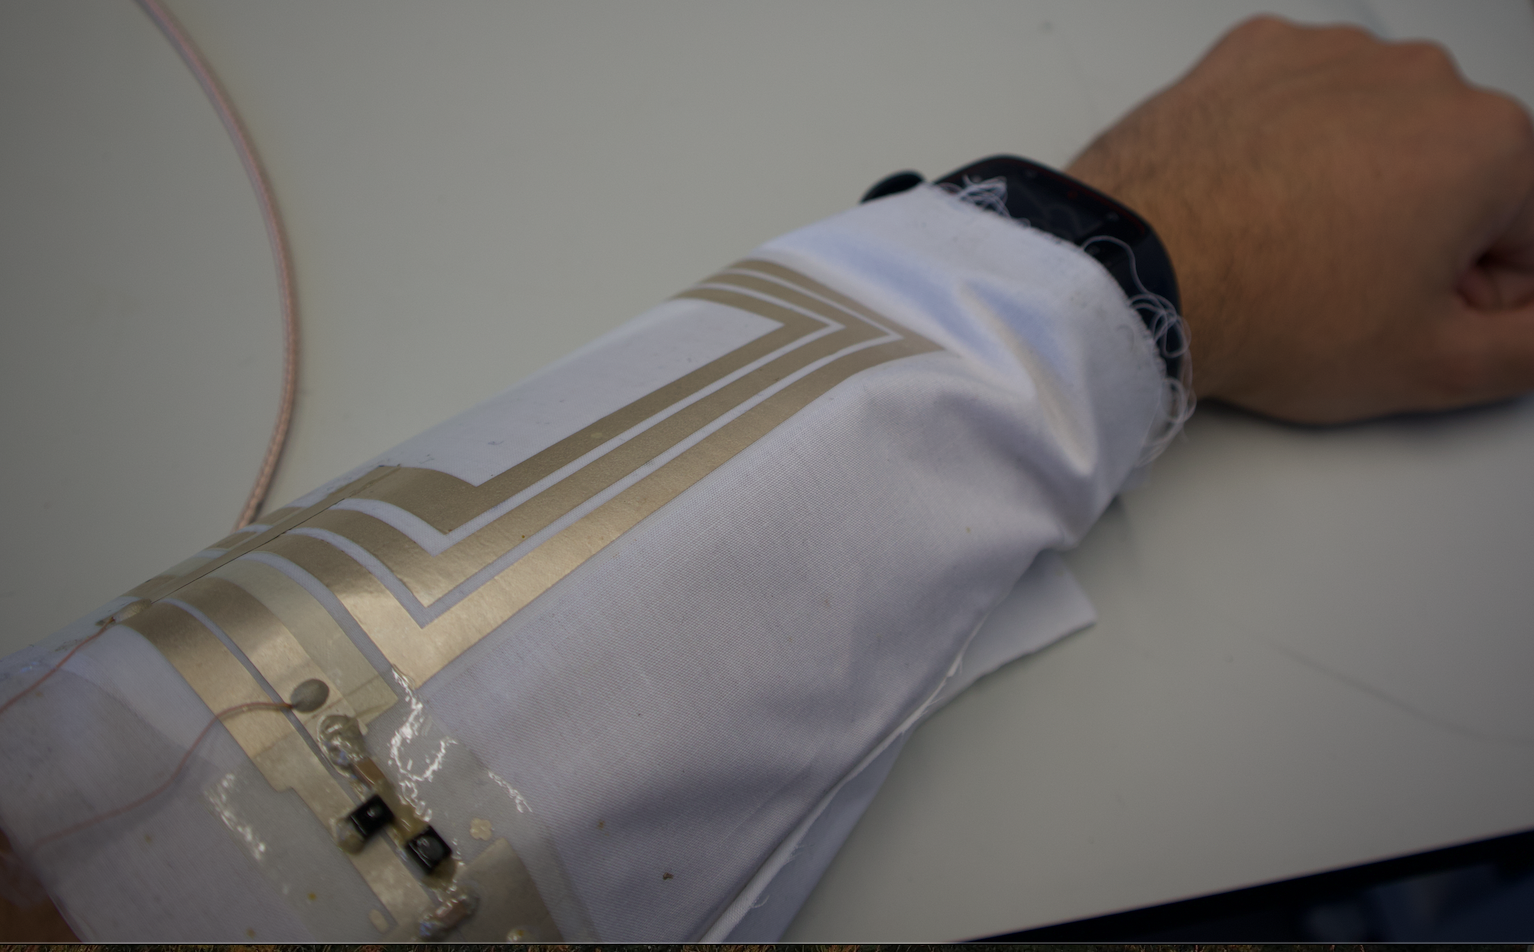 A demonstration of the flexible, wirelessly-powered wearable heater developed by Dr Mahmoud Wagih